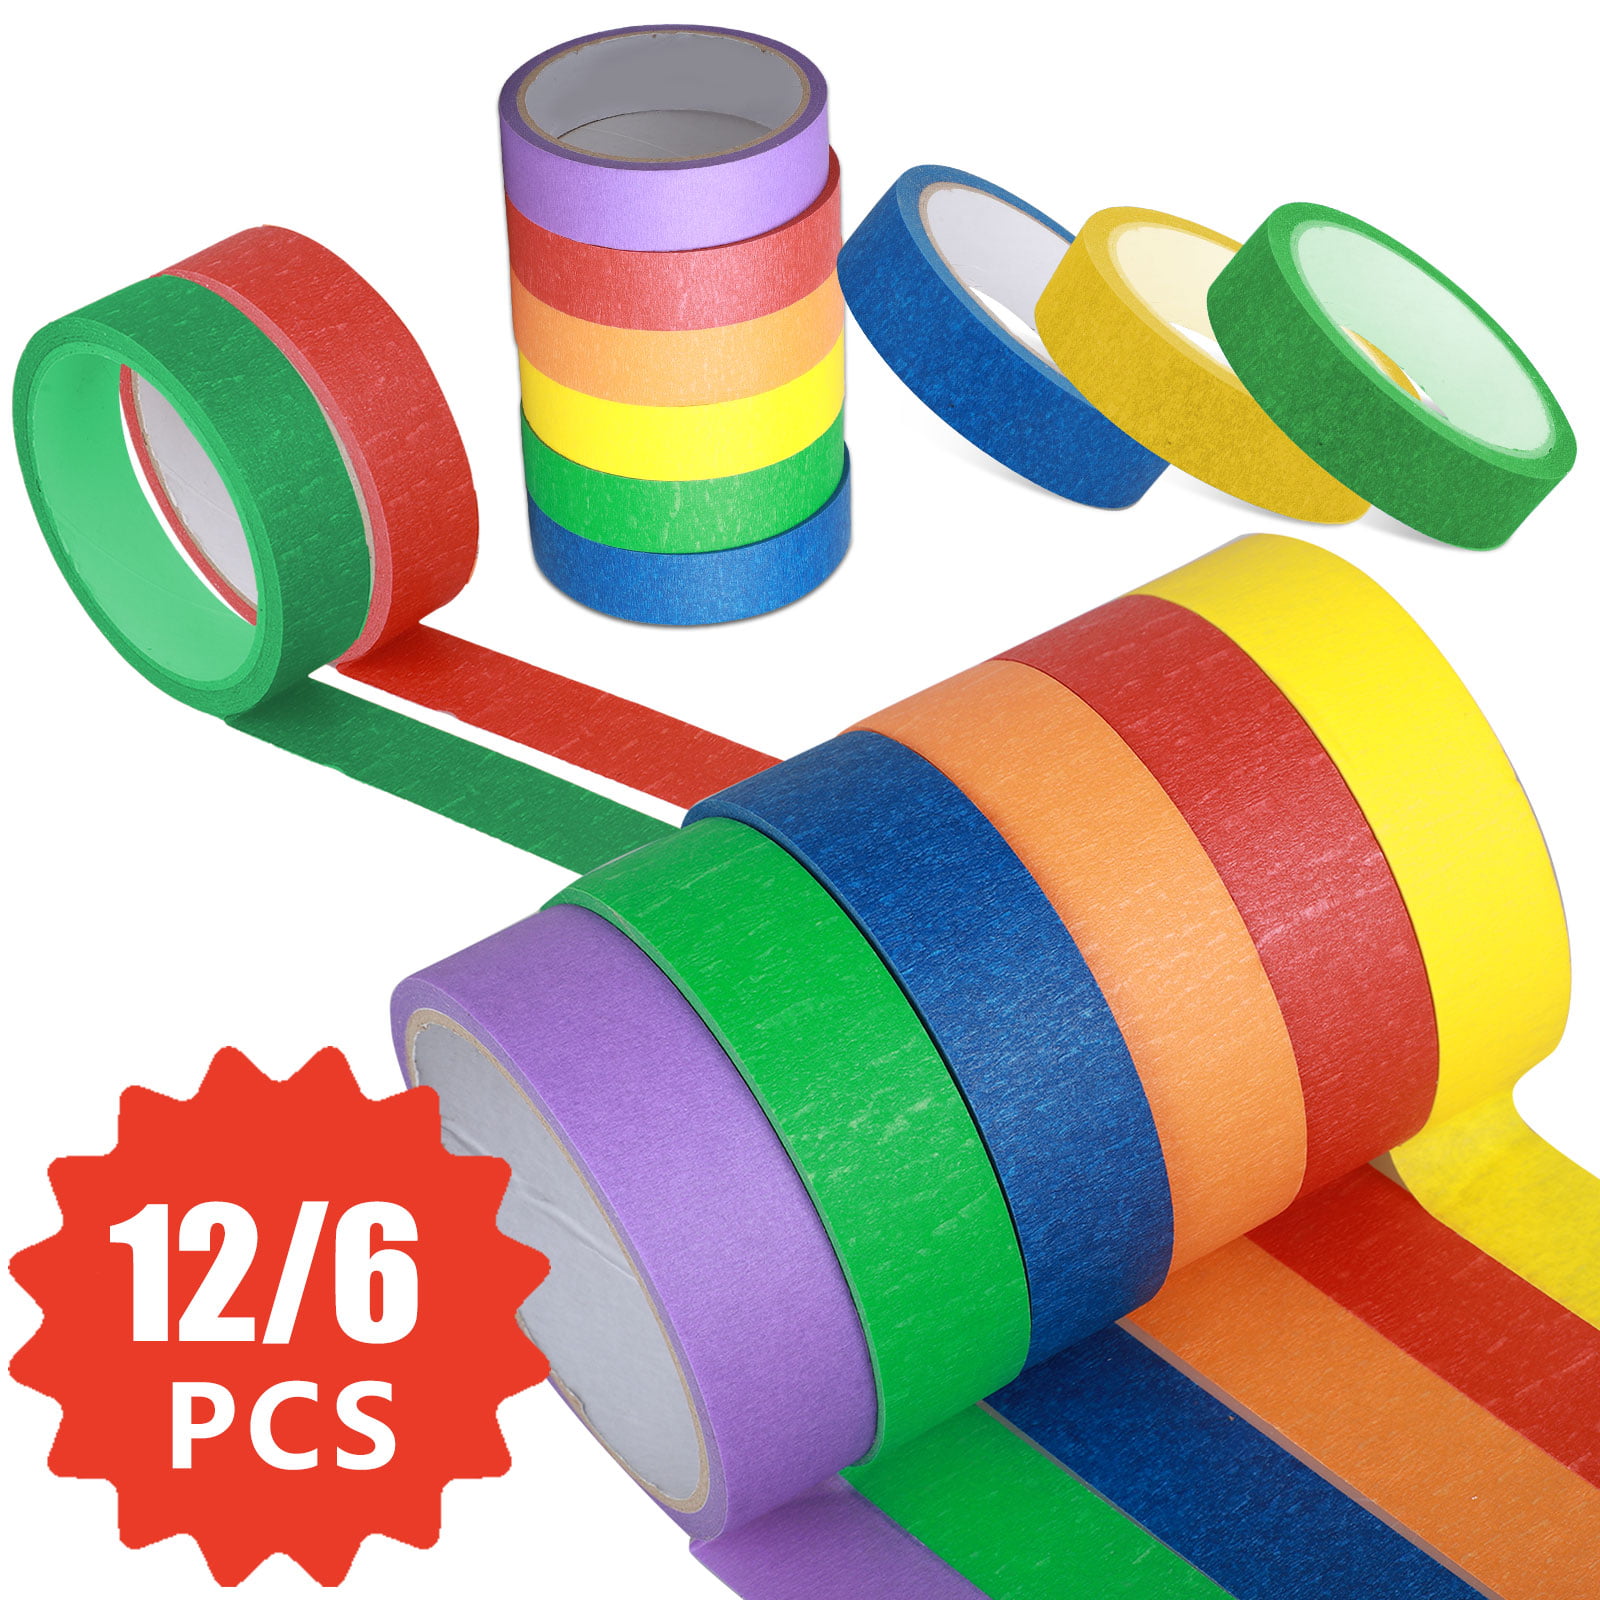 12 6 Rolls Colored Masking Tape Crafts Labeling Tape Rainbow Colors Decorative Masking Tapes